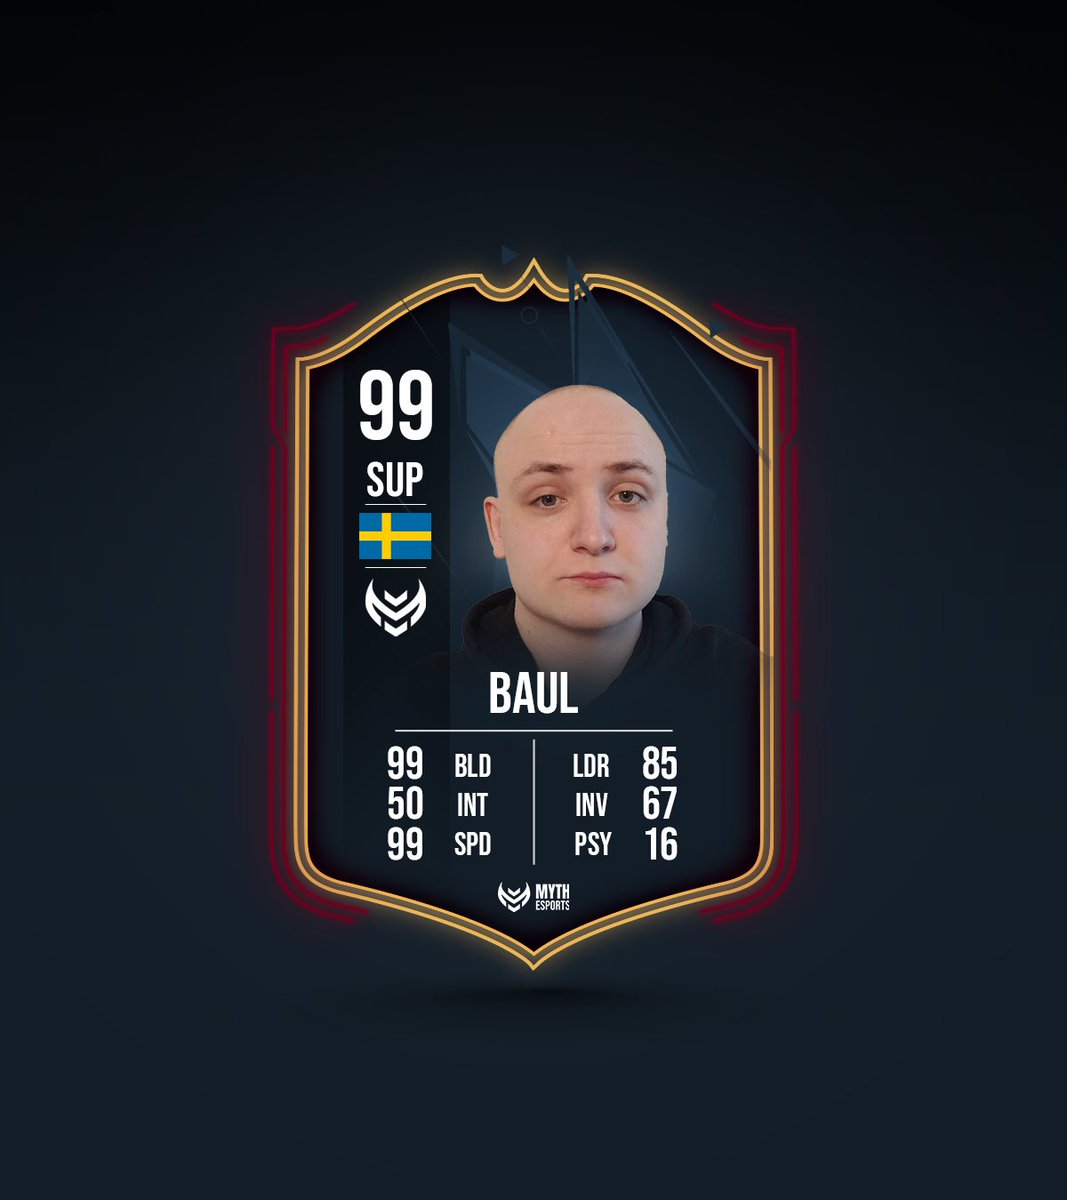 Meet Our @EliteSeriesLOL Team #8/8! Introducing @INTBaul, our support for the upcoming split: 👴 Bald: 99 🧠 INTer: 50 🏎️ Speed Demon: 99 👥 Leader: 85 🛠️ Inventor: 67 😈 Psycho: 16 @INTBaul, the bald genius, is ready to conquer the rift!